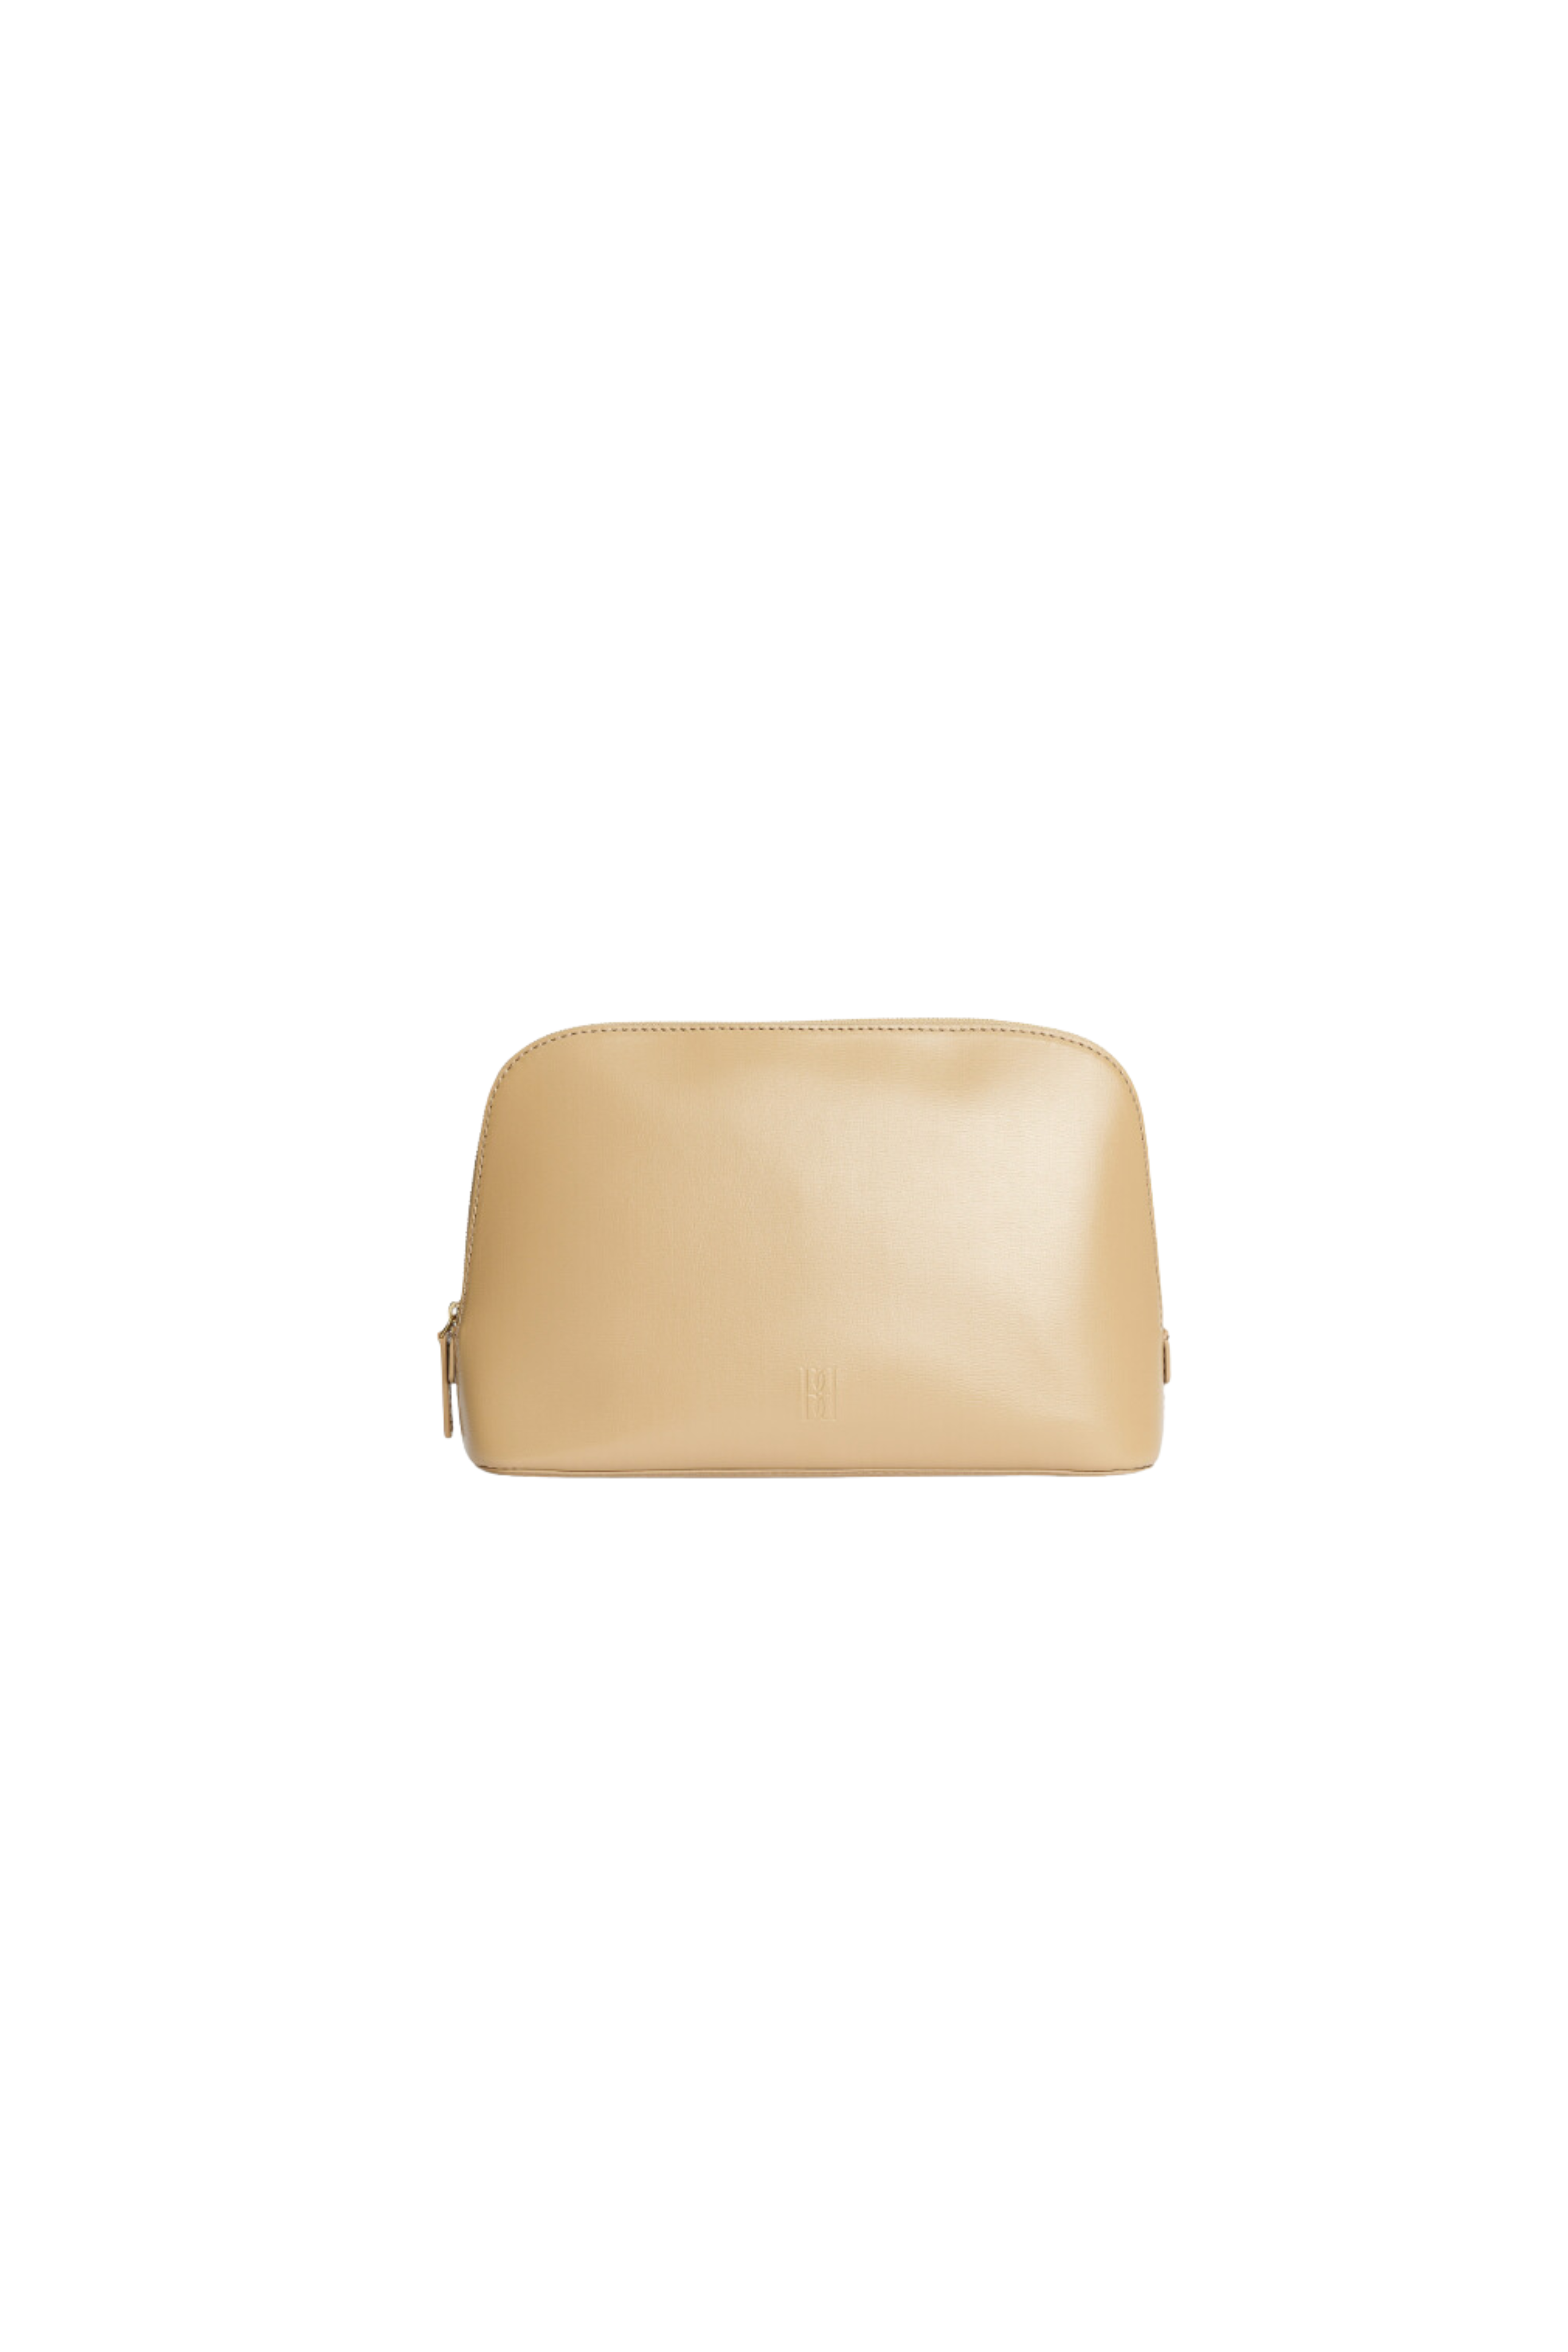 BY MALENE BIRGER Aya Small Beige Leather Makeup Pouch